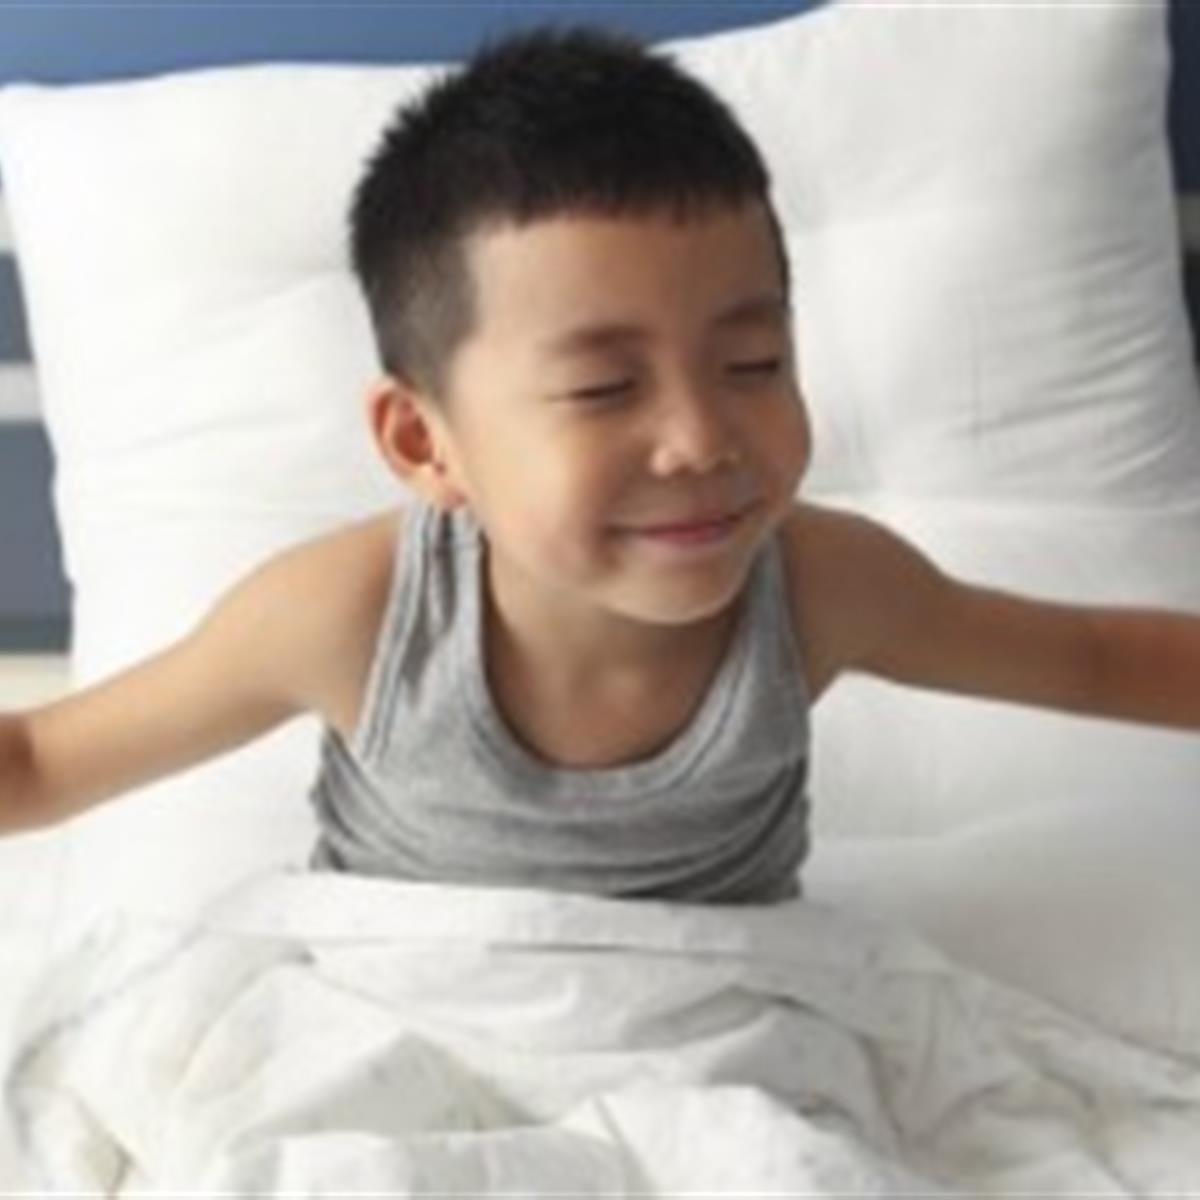 Sleeping Porn Videos Of Mothers And Sons - Healthy Sleep Habits: How Many Hours Does Your Child Need? -  HealthyChildren.org